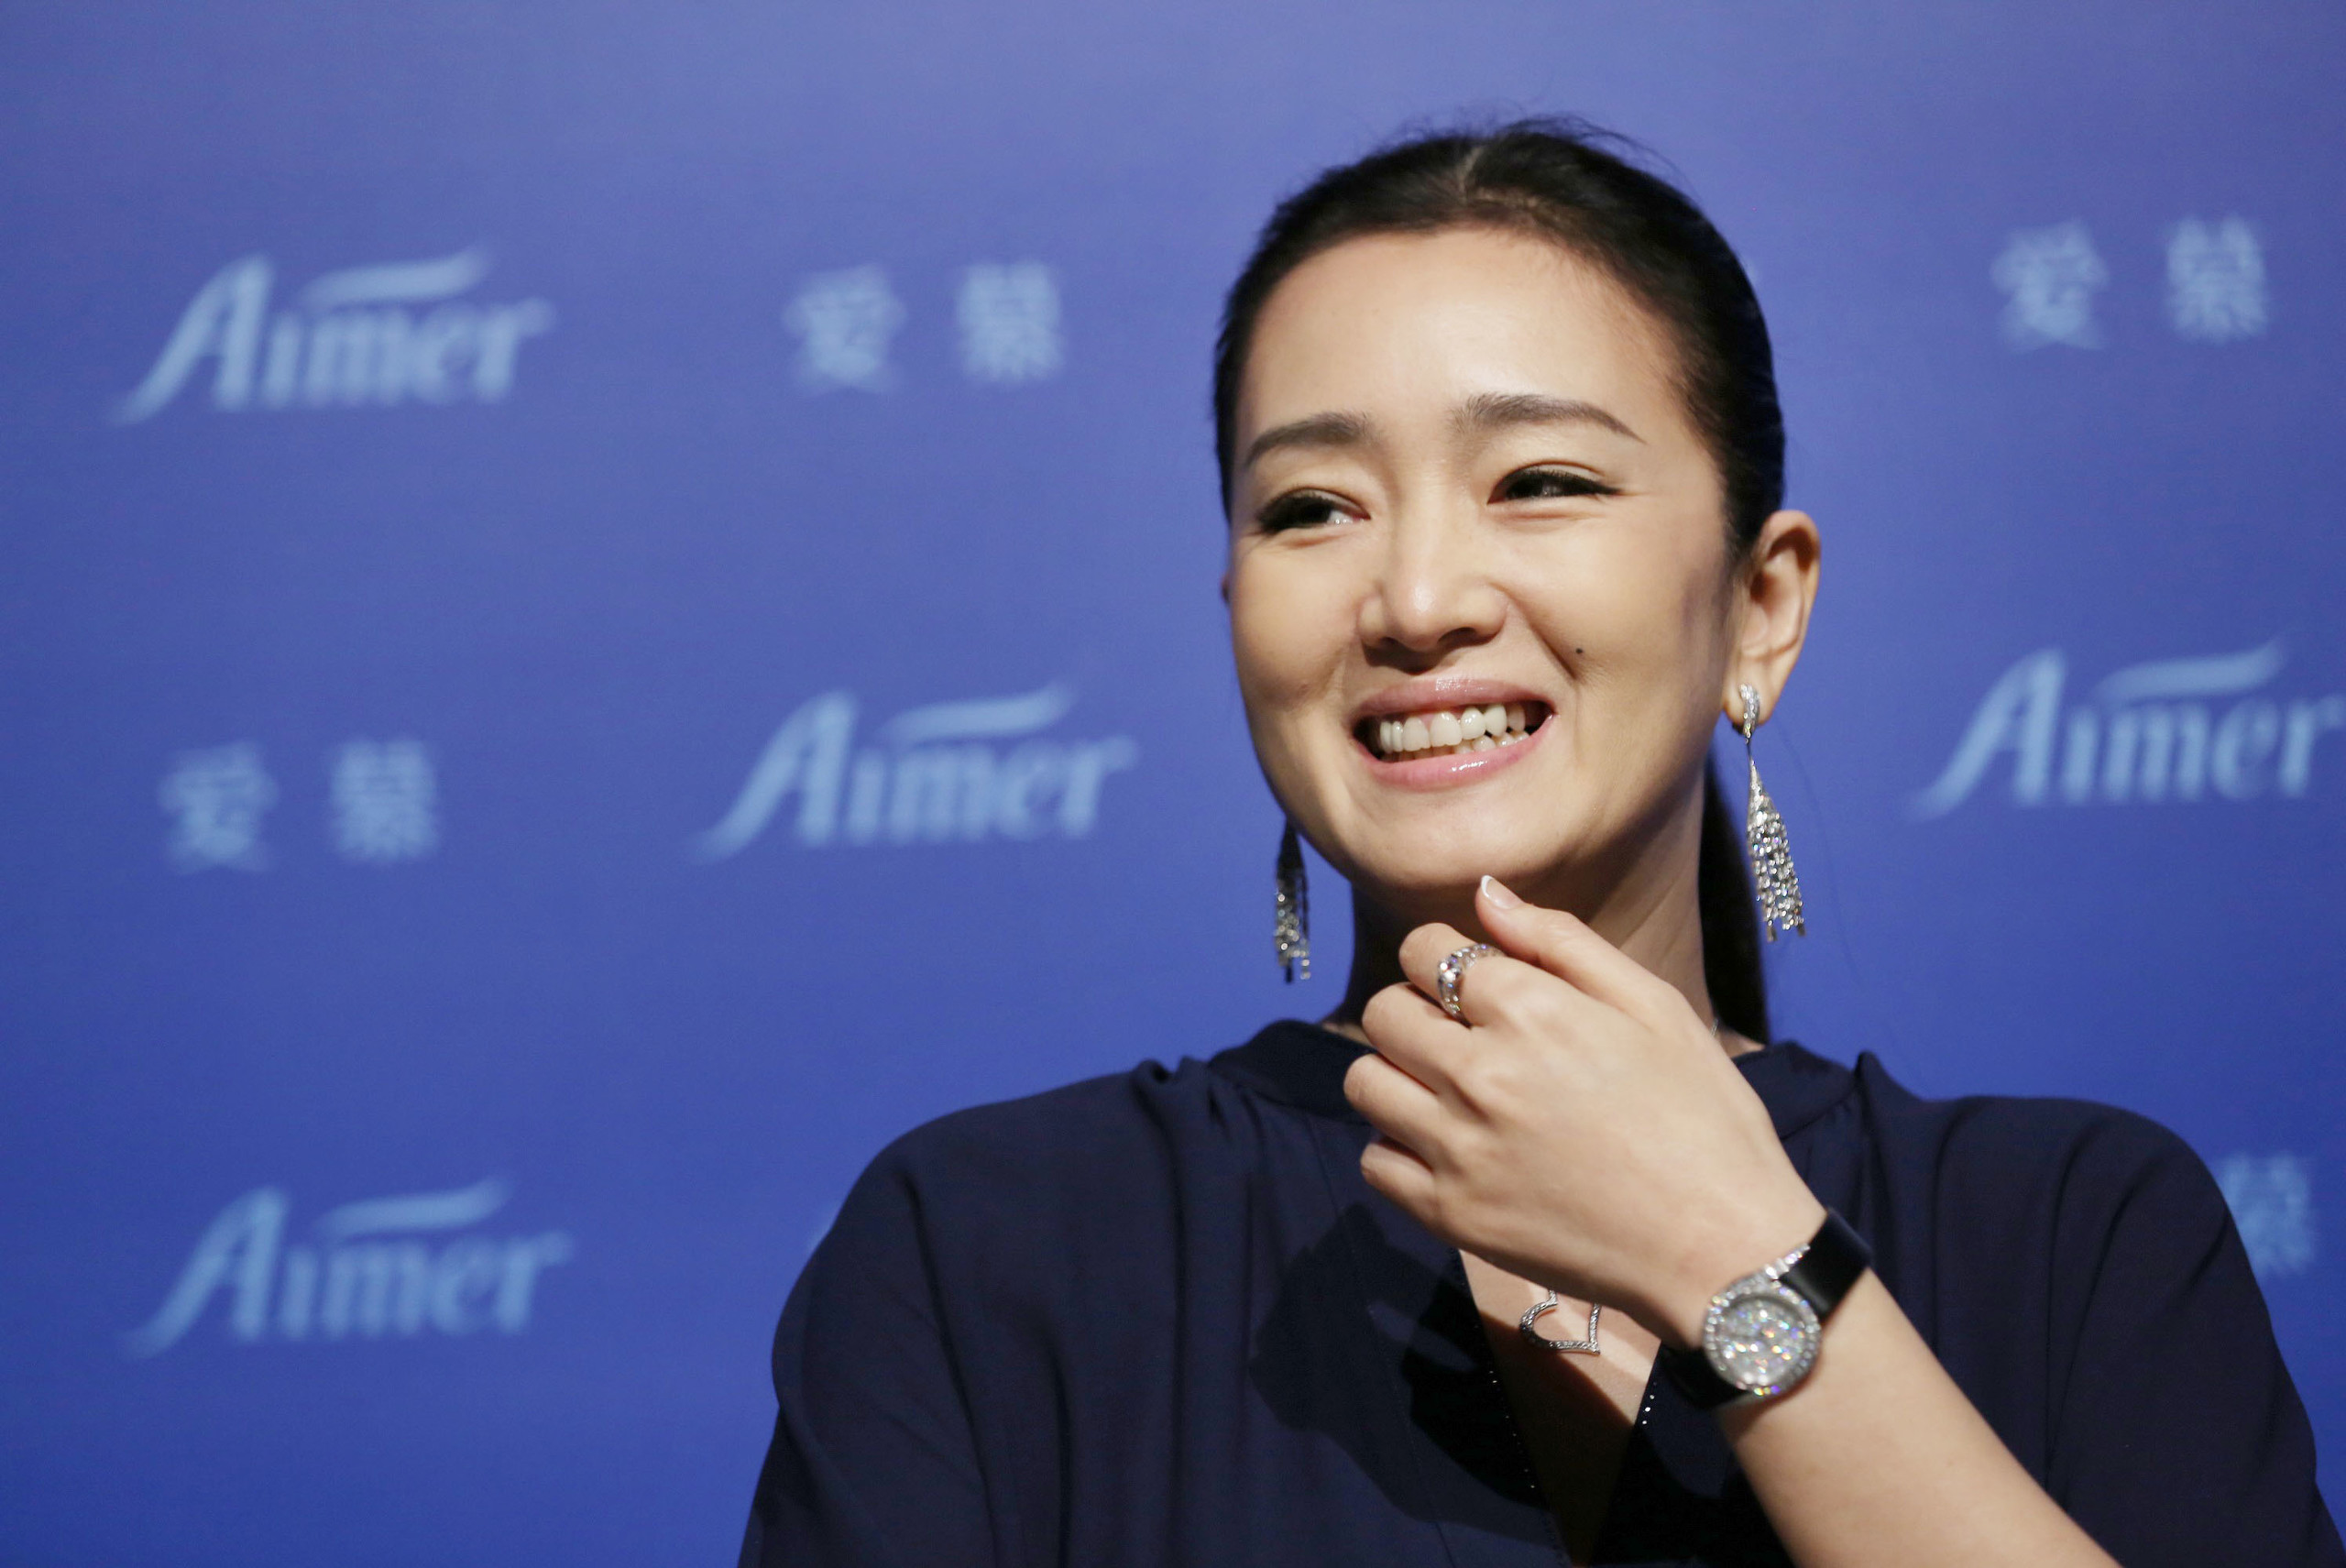 Gong Li, a legendary actress in the Chinese film industry, has a very ...